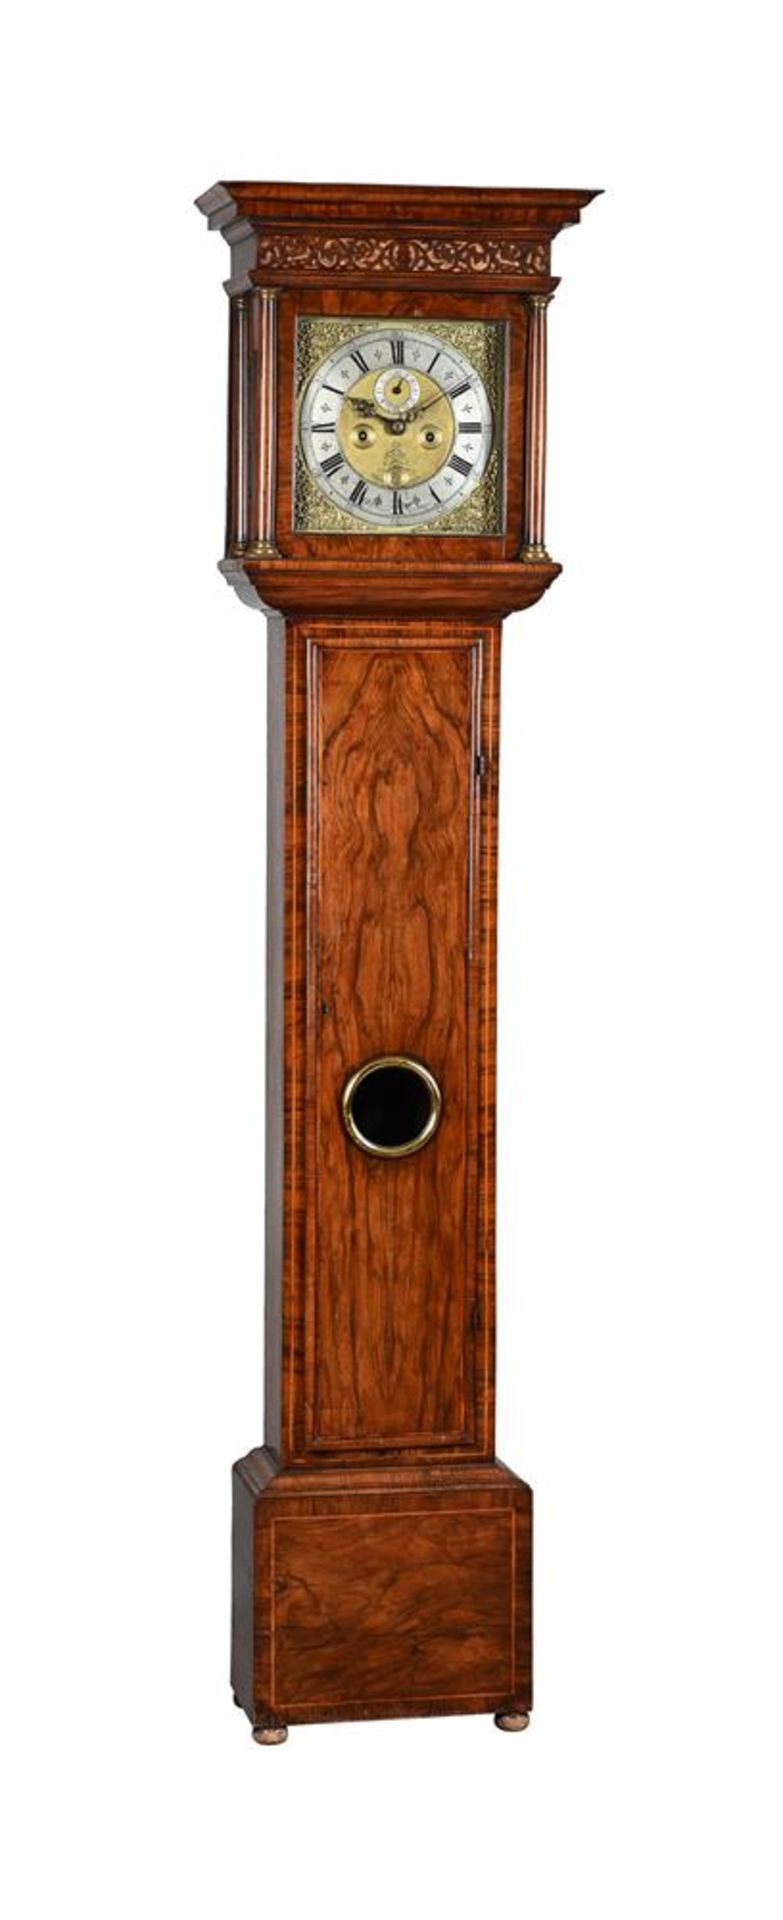 A WALNUT EIGHT-DAY LONGCASE CLOCK WITH AN ELEVEN-INCH DIAL